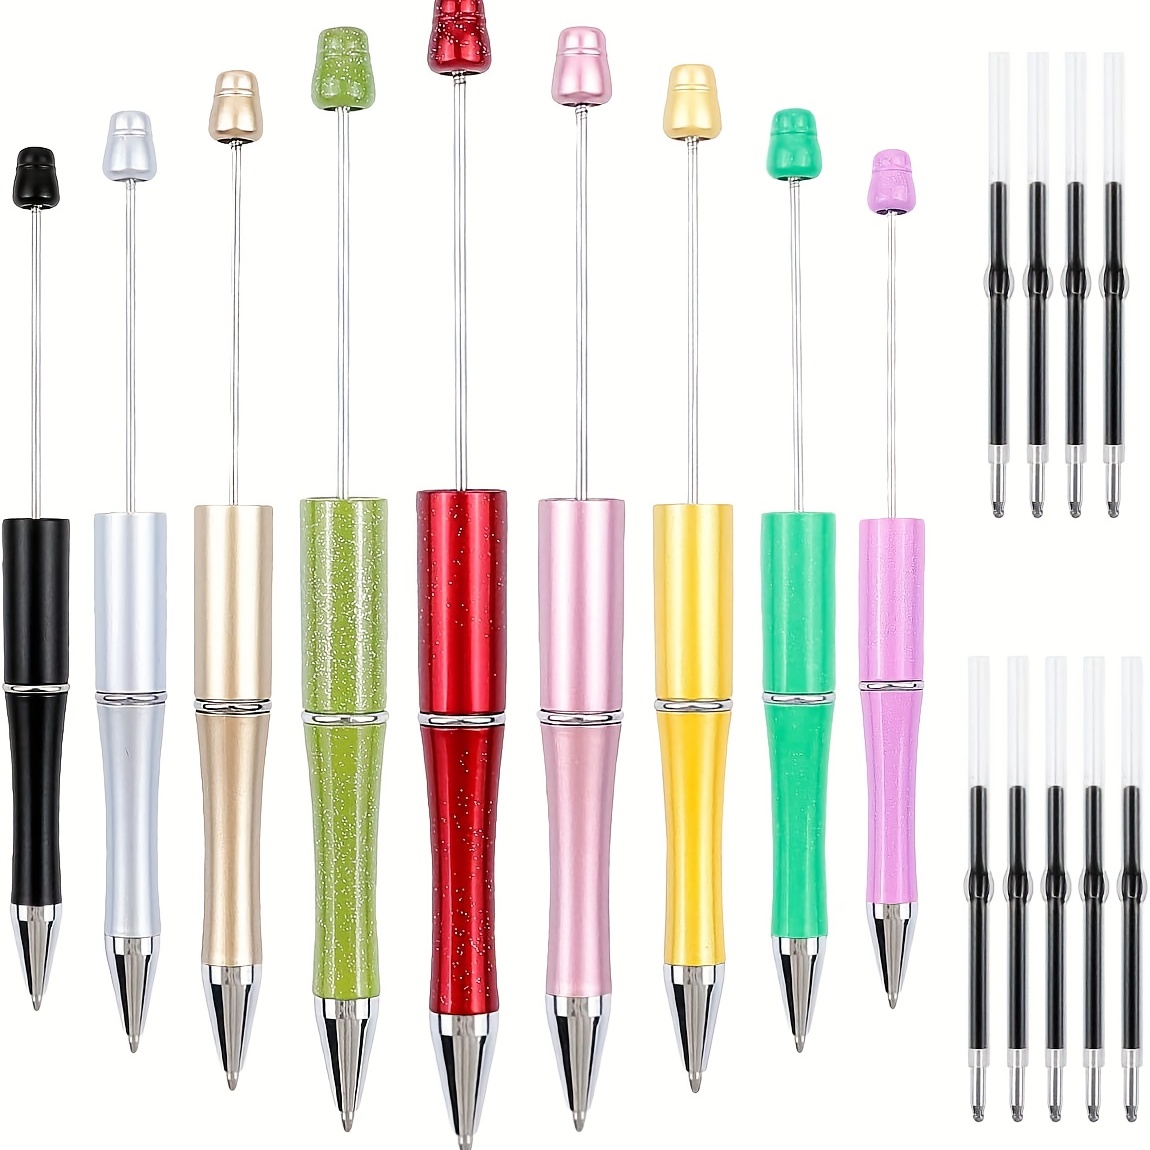  Crtiin 15 Pcs Beadable Pens Valentines Assorted Bead Pens DIY  Ballpoint Beaded Pens with 60 Charm Beads Pendants Beads Spacer Bead 15 Pen  Packaging Bags for Gift Business Office School(Cute) 